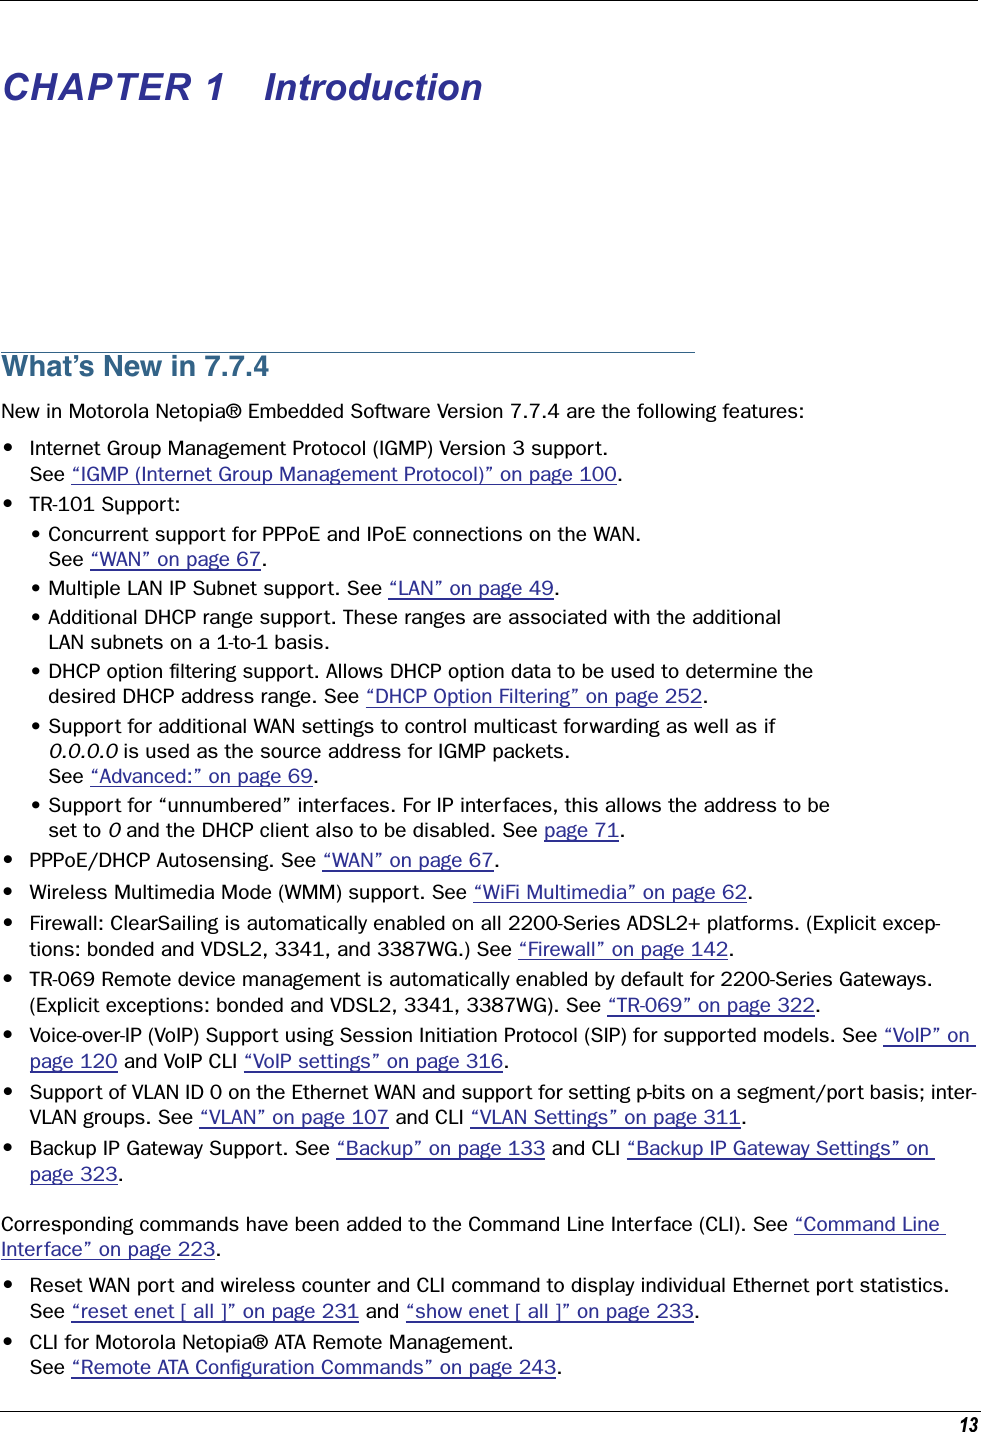  13 CHAPTER 1 Introduction What’s New in 7.7.4 New in Motorola Netopia® Embedded Software Version 7.7.4 are the following features: • Internet Group Management Protocol (IGMP) Version 3 support. See “IGMP (Internet Group Management Protocol)” on page 100. • TR-101 Support:• Concurrent support for PPPoE and IPoE connections on the WAN.    See “WAN” on page 67.• Multiple LAN IP Subnet support. See “LAN” on page 49.• Additional DHCP range support. These ranges are associated with the additional    LAN subnets on a 1-to-1 basis.• DHCP option ﬁltering support. Allows DHCP option data to be used to determine the   desired DHCP address range. See “DHCP Option Filtering” on page 252.• Support for additional WAN settings to control multicast forwarding as well as if    0.0.0.0  is used as the source address for IGMP packets.    See “Advanced:” on page 69.• Support for “unnumbered” interfaces. For IP interfaces, this allows the address to be   set to  0  and the DHCP client also to be disabled. See page 71. • PPPoE/DHCP Autosensing. See “WAN” on page 67. • Wireless Multimedia Mode (WMM) support. See “WiFi Multimedia” on page 62. • Firewall: ClearSailing is automatically enabled on all 2200-Series ADSL2+ platforms. (Explicit excep-tions: bonded and VDSL2, 3341, and 3387WG.) See “Firewall” on page 142. • TR-069 Remote device management is automatically enabled by default for 2200-Series Gateways. (Explicit exceptions: bonded and VDSL2, 3341, 3387WG). See “TR-069” on page 322. • Voice-over-IP (VoIP) Support using Session Initiation Protocol (SIP) for supported models. See “VoIP” on page 120 and VoIP CLI “VoIP settings” on page 316. • Support of VLAN ID 0 on the Ethernet WAN and support for setting p-bits on a segment/port basis; inter-VLAN groups. See “VLAN” on page 107 and CLI “VLAN Settings” on page 311. • Backup IP Gateway Support. See “Backup” on page 133 and CLI “Backup IP Gateway Settings” on page 323.Corresponding commands have been added to the Command Line Interface (CLI). See “Command Line Interface” on page 223. • Reset WAN port and wireless counter and CLI command to display individual Ethernet port statistics. See “reset enet [ all ]” on page 231 and “show enet [ all ]” on page 233. •CLI for Motorola Netopia® ATA Remote Management. See “Remote ATA Conﬁguration Commands” on page 243.